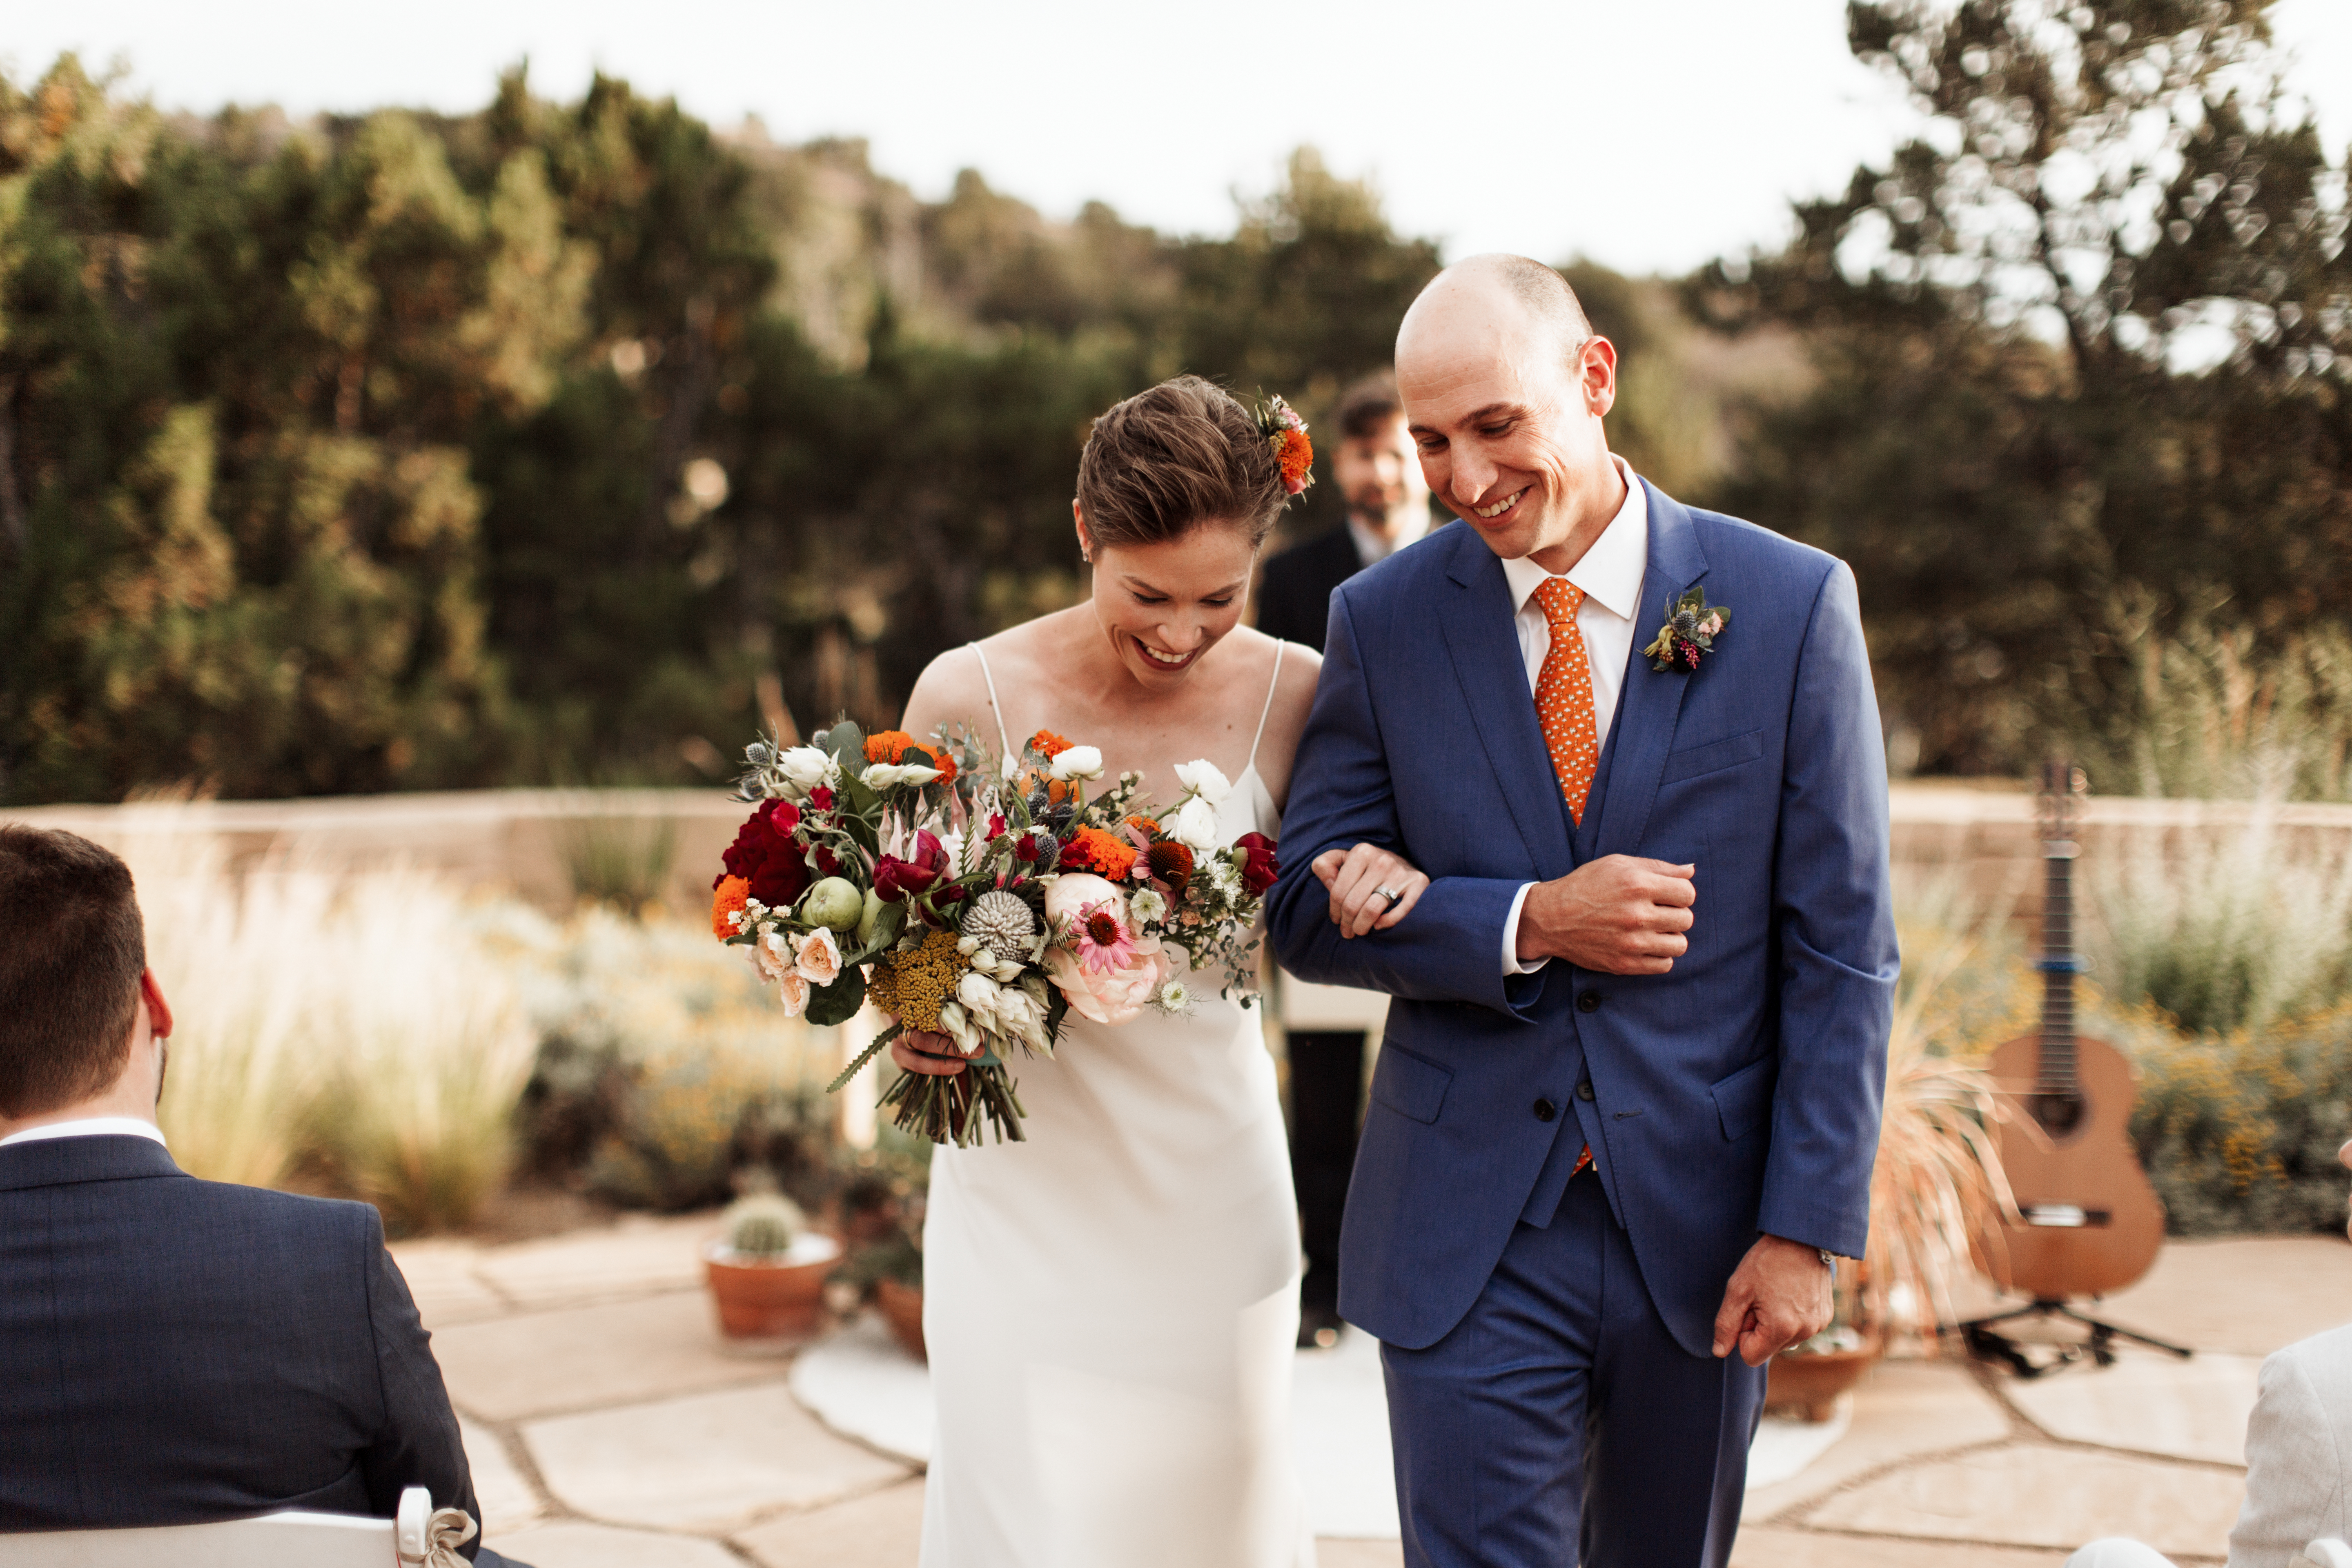 jewel tones wedding outdoor ceremony planning New Mexico design inspiration orange blue suit silk gown bouquet live music band vows officiants real hair bridal photography romantic couple natural light